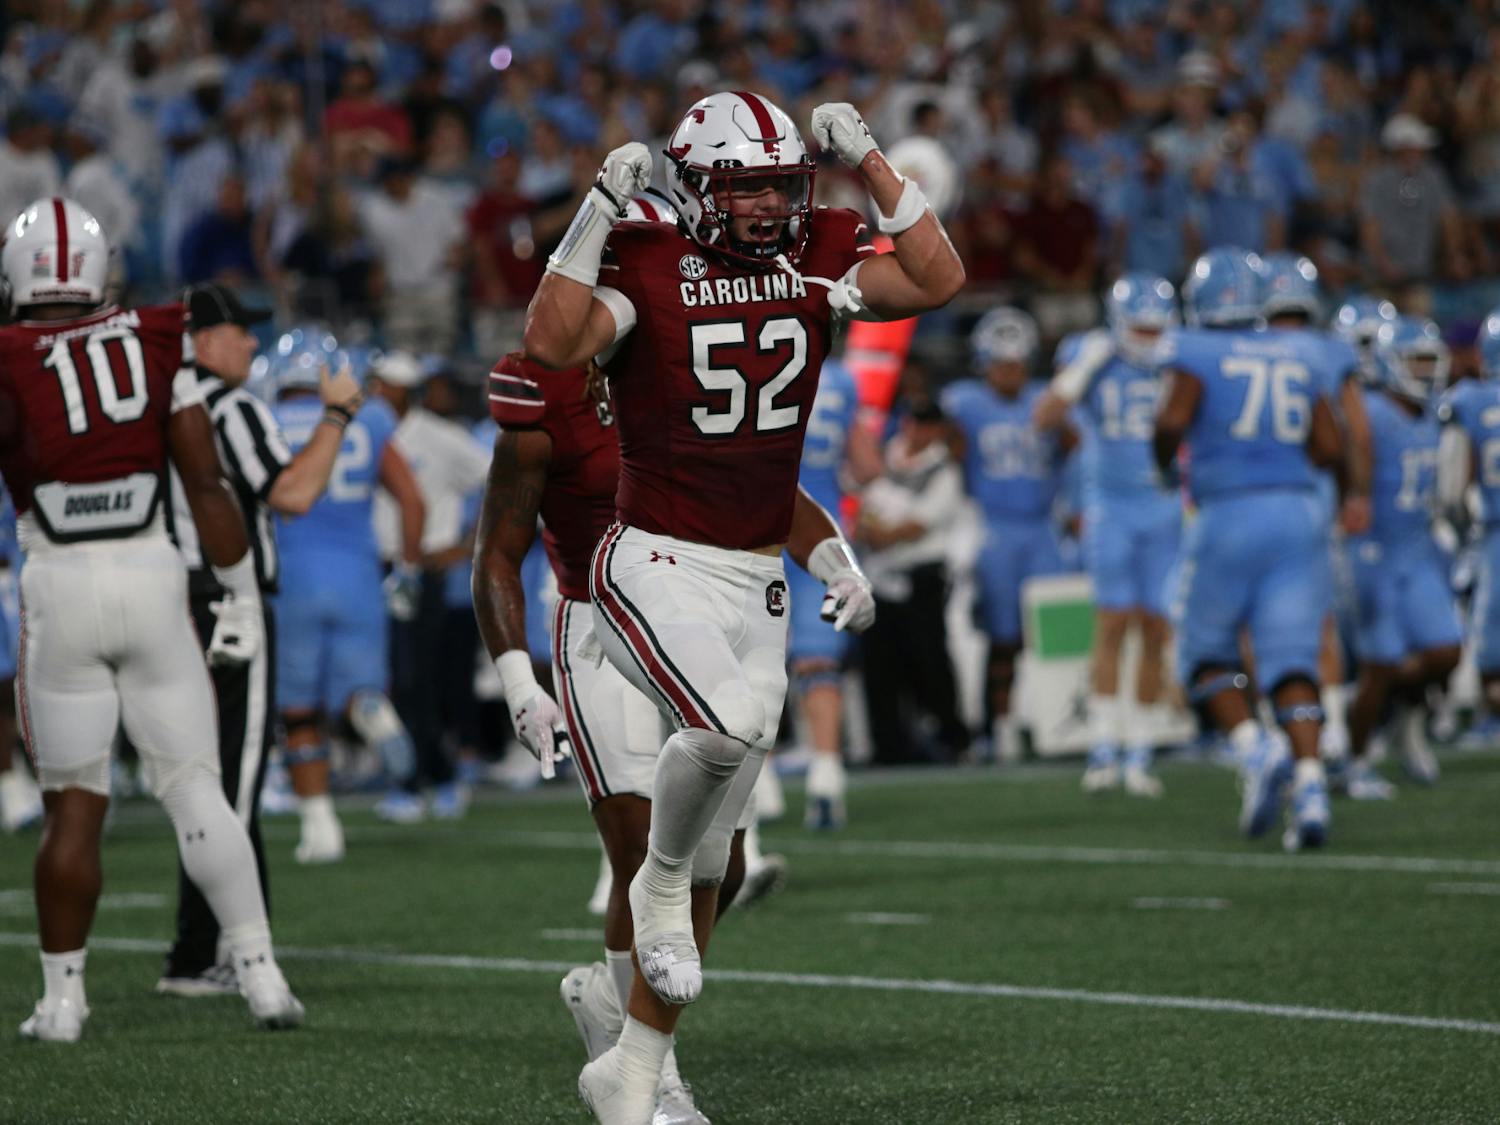 Sophomore linebacker Stone Blanton celebrates after a successful defensive play on Sept. 2, 2023. The South Carolina Gamecocks fell to the UNC Tar Heels 31-17 in Charlotte, North Carolina.